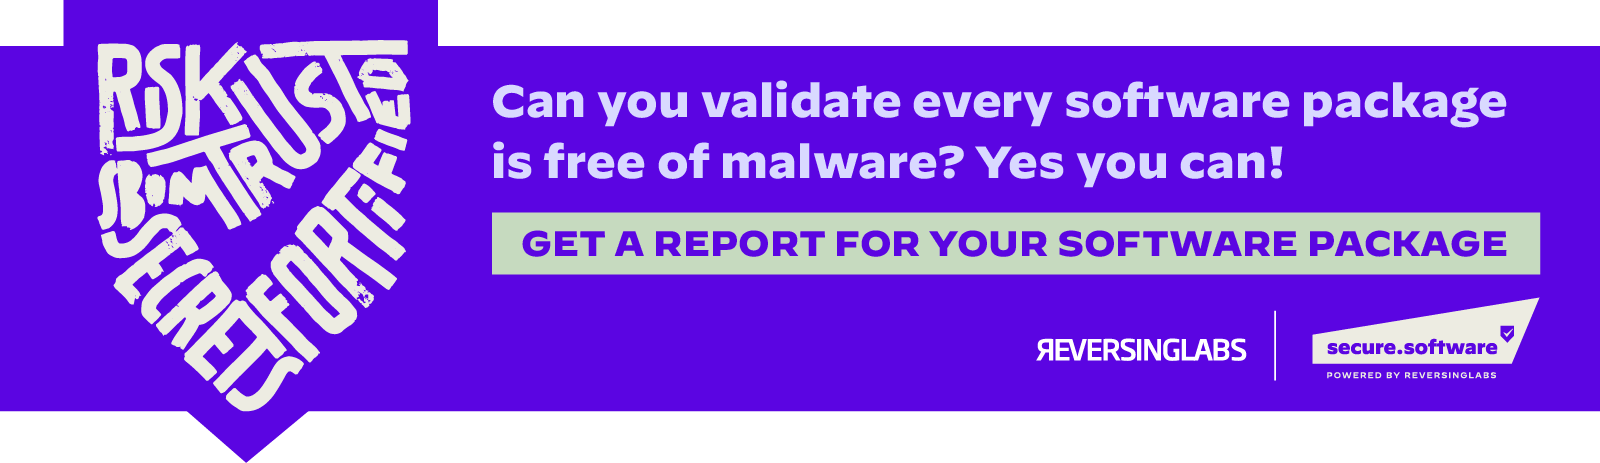 Get a report for YOUR software package